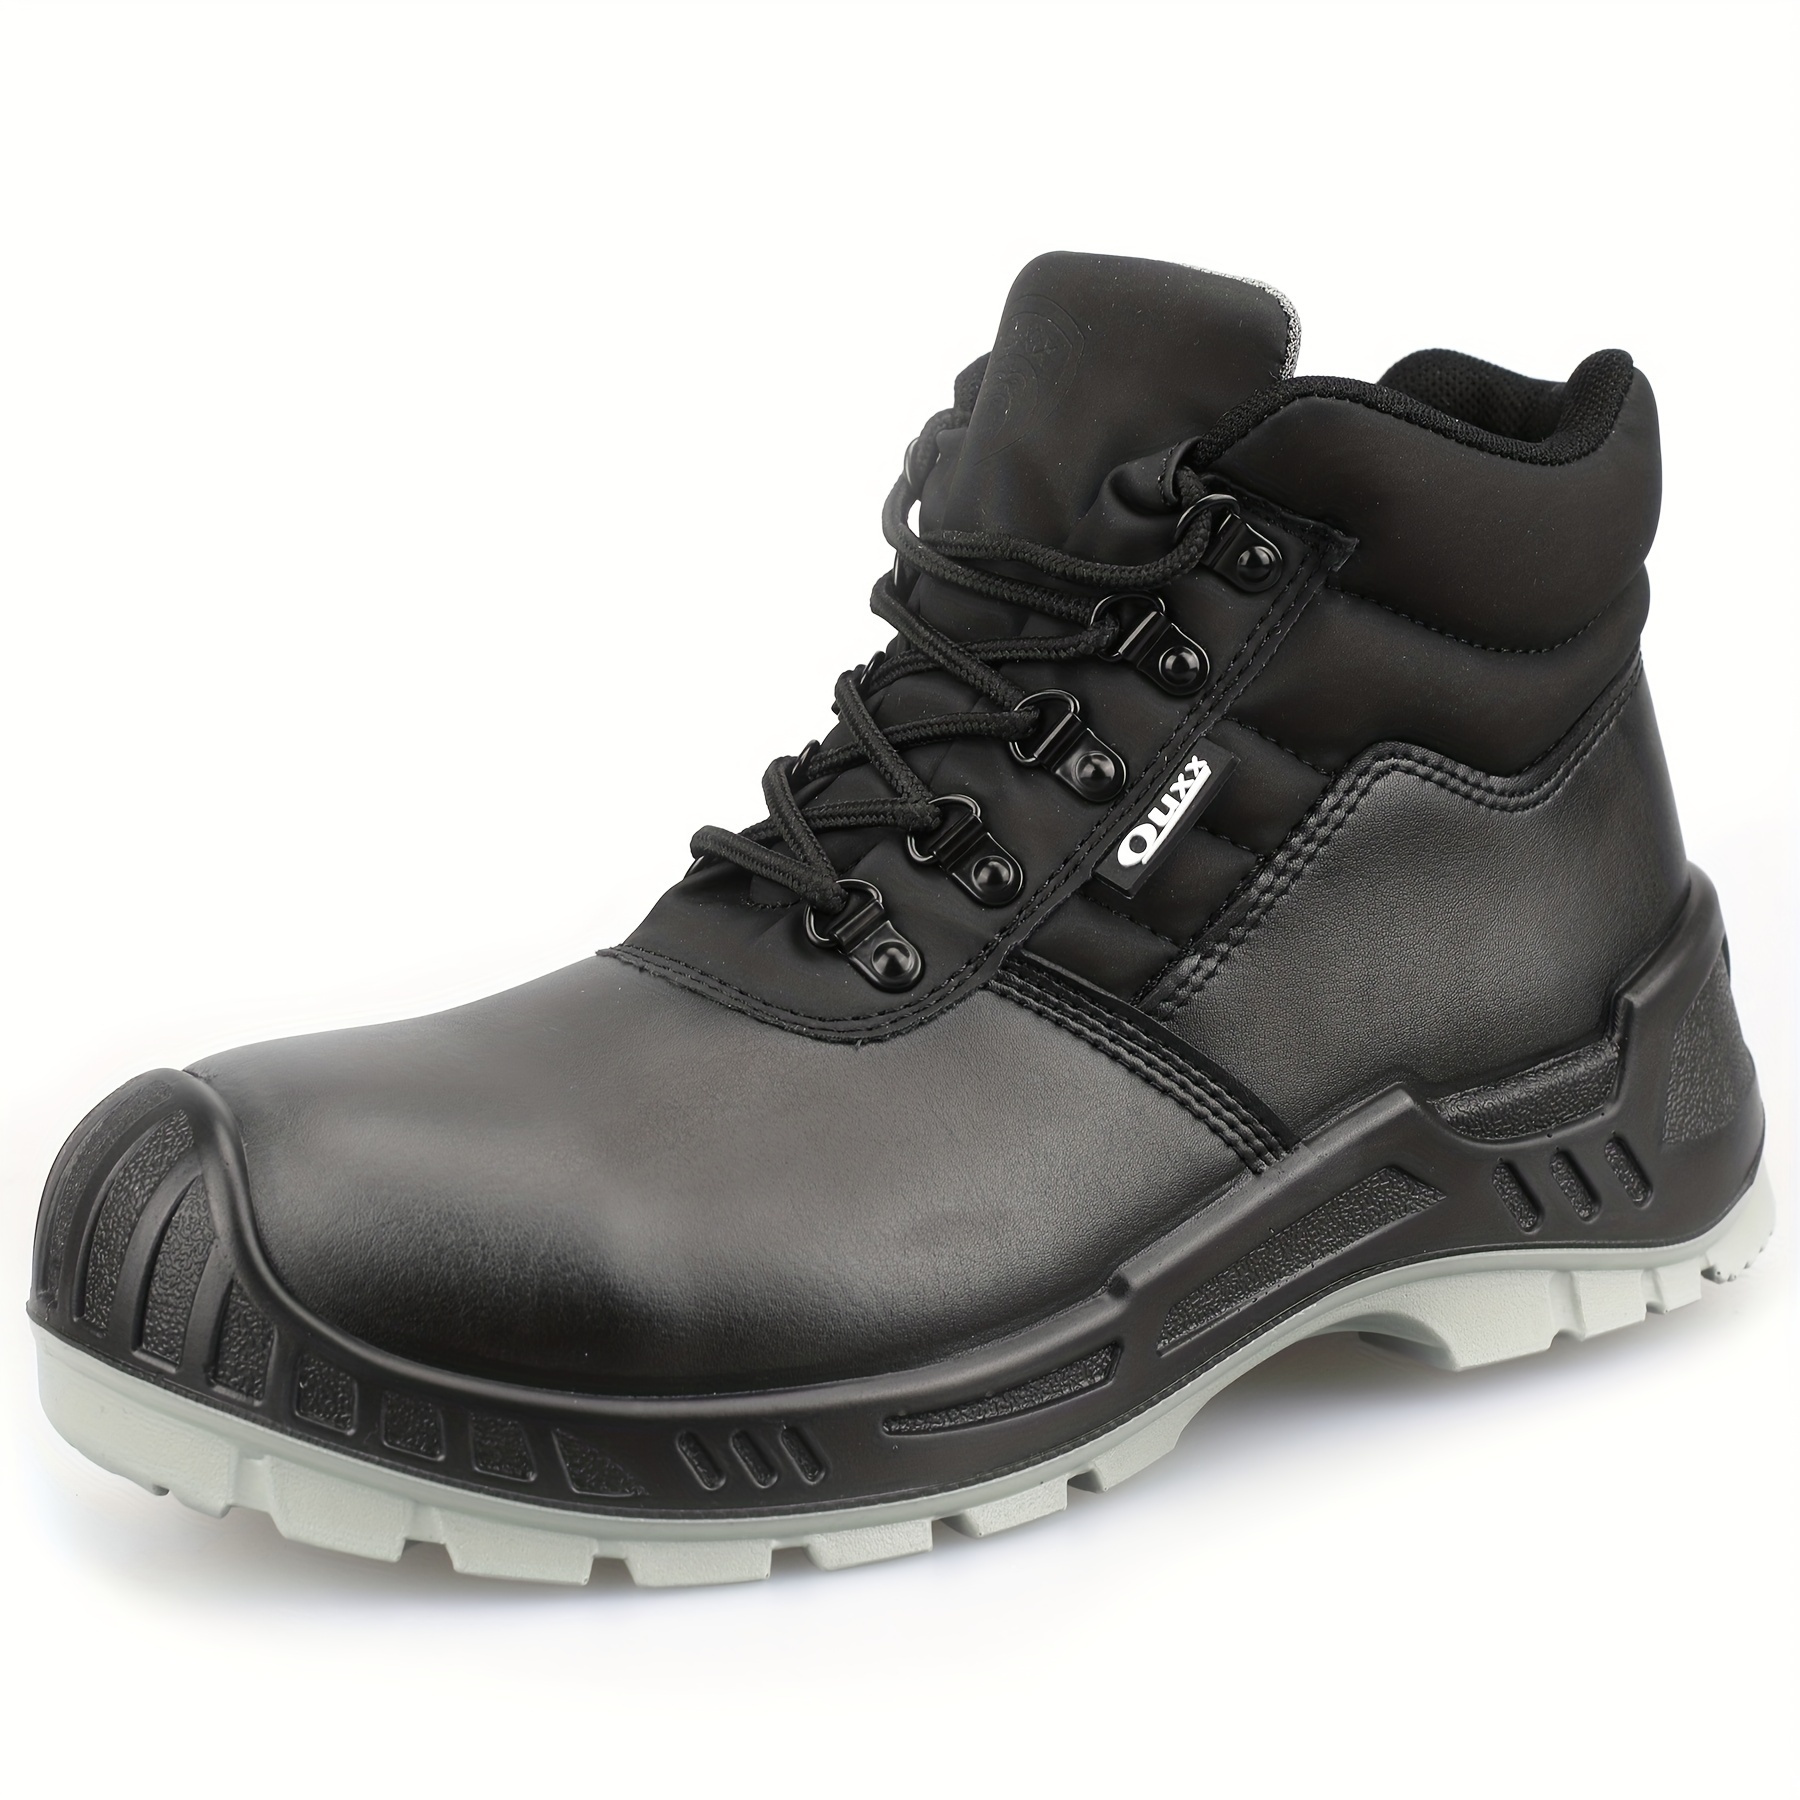 

Men's Composite Toe Work Boots, Safety Shoes, Slip-resistant Boot